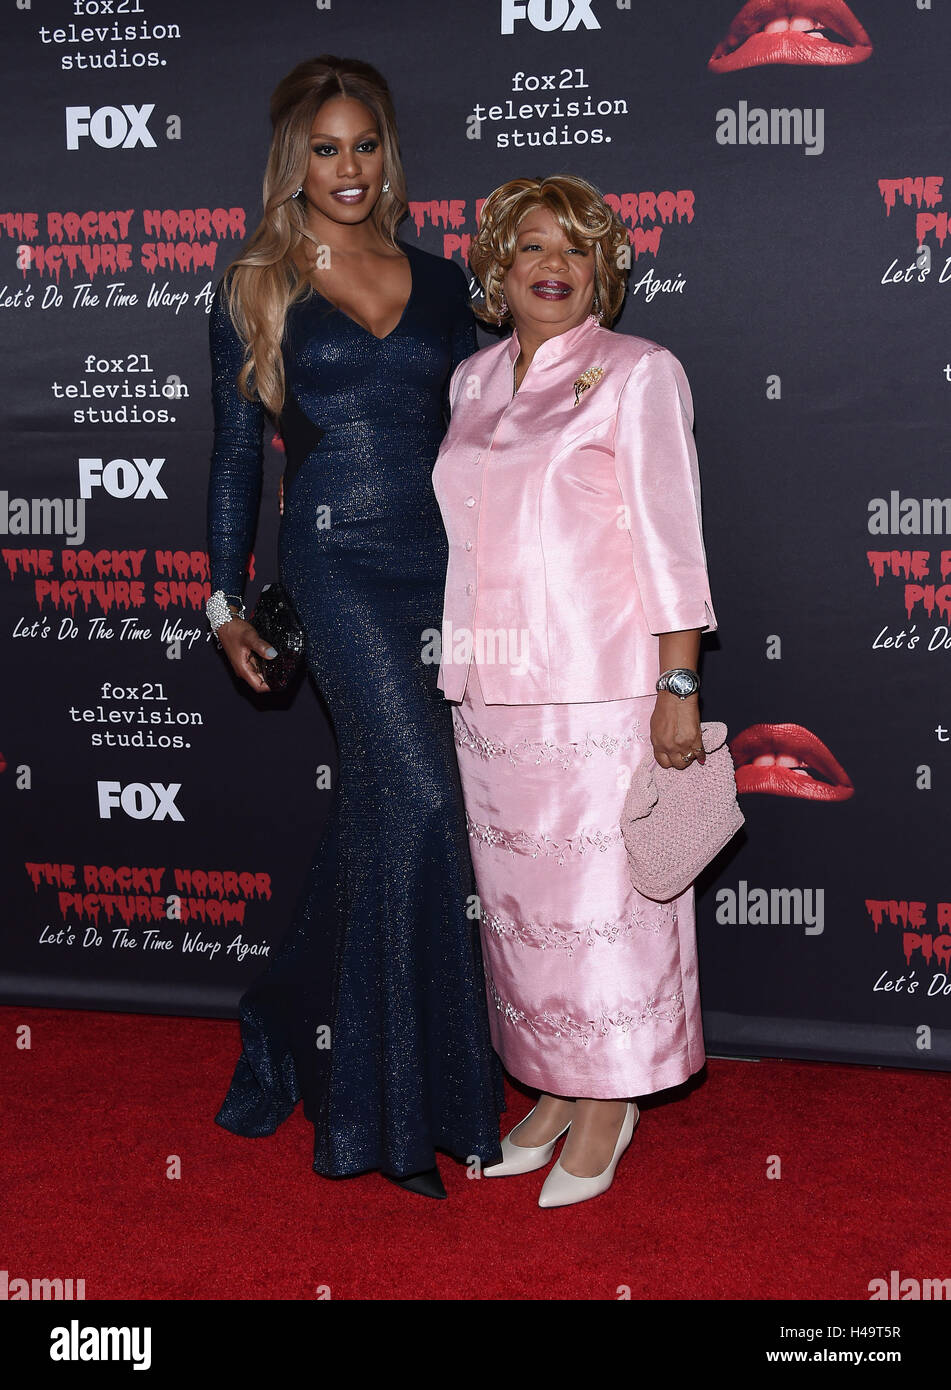 West Hollywood, California, USA. 13th Oct, 2016. Laverne Cox and Gloria Cox arrives for the premiere of ''The Rocky Horror Picture Show; Let's Do The Time Warp Again'' Premiere at the Roxy theater. Credit:  Lisa O'Connor/ZUMA Wire/Alamy Live News Stock Photo